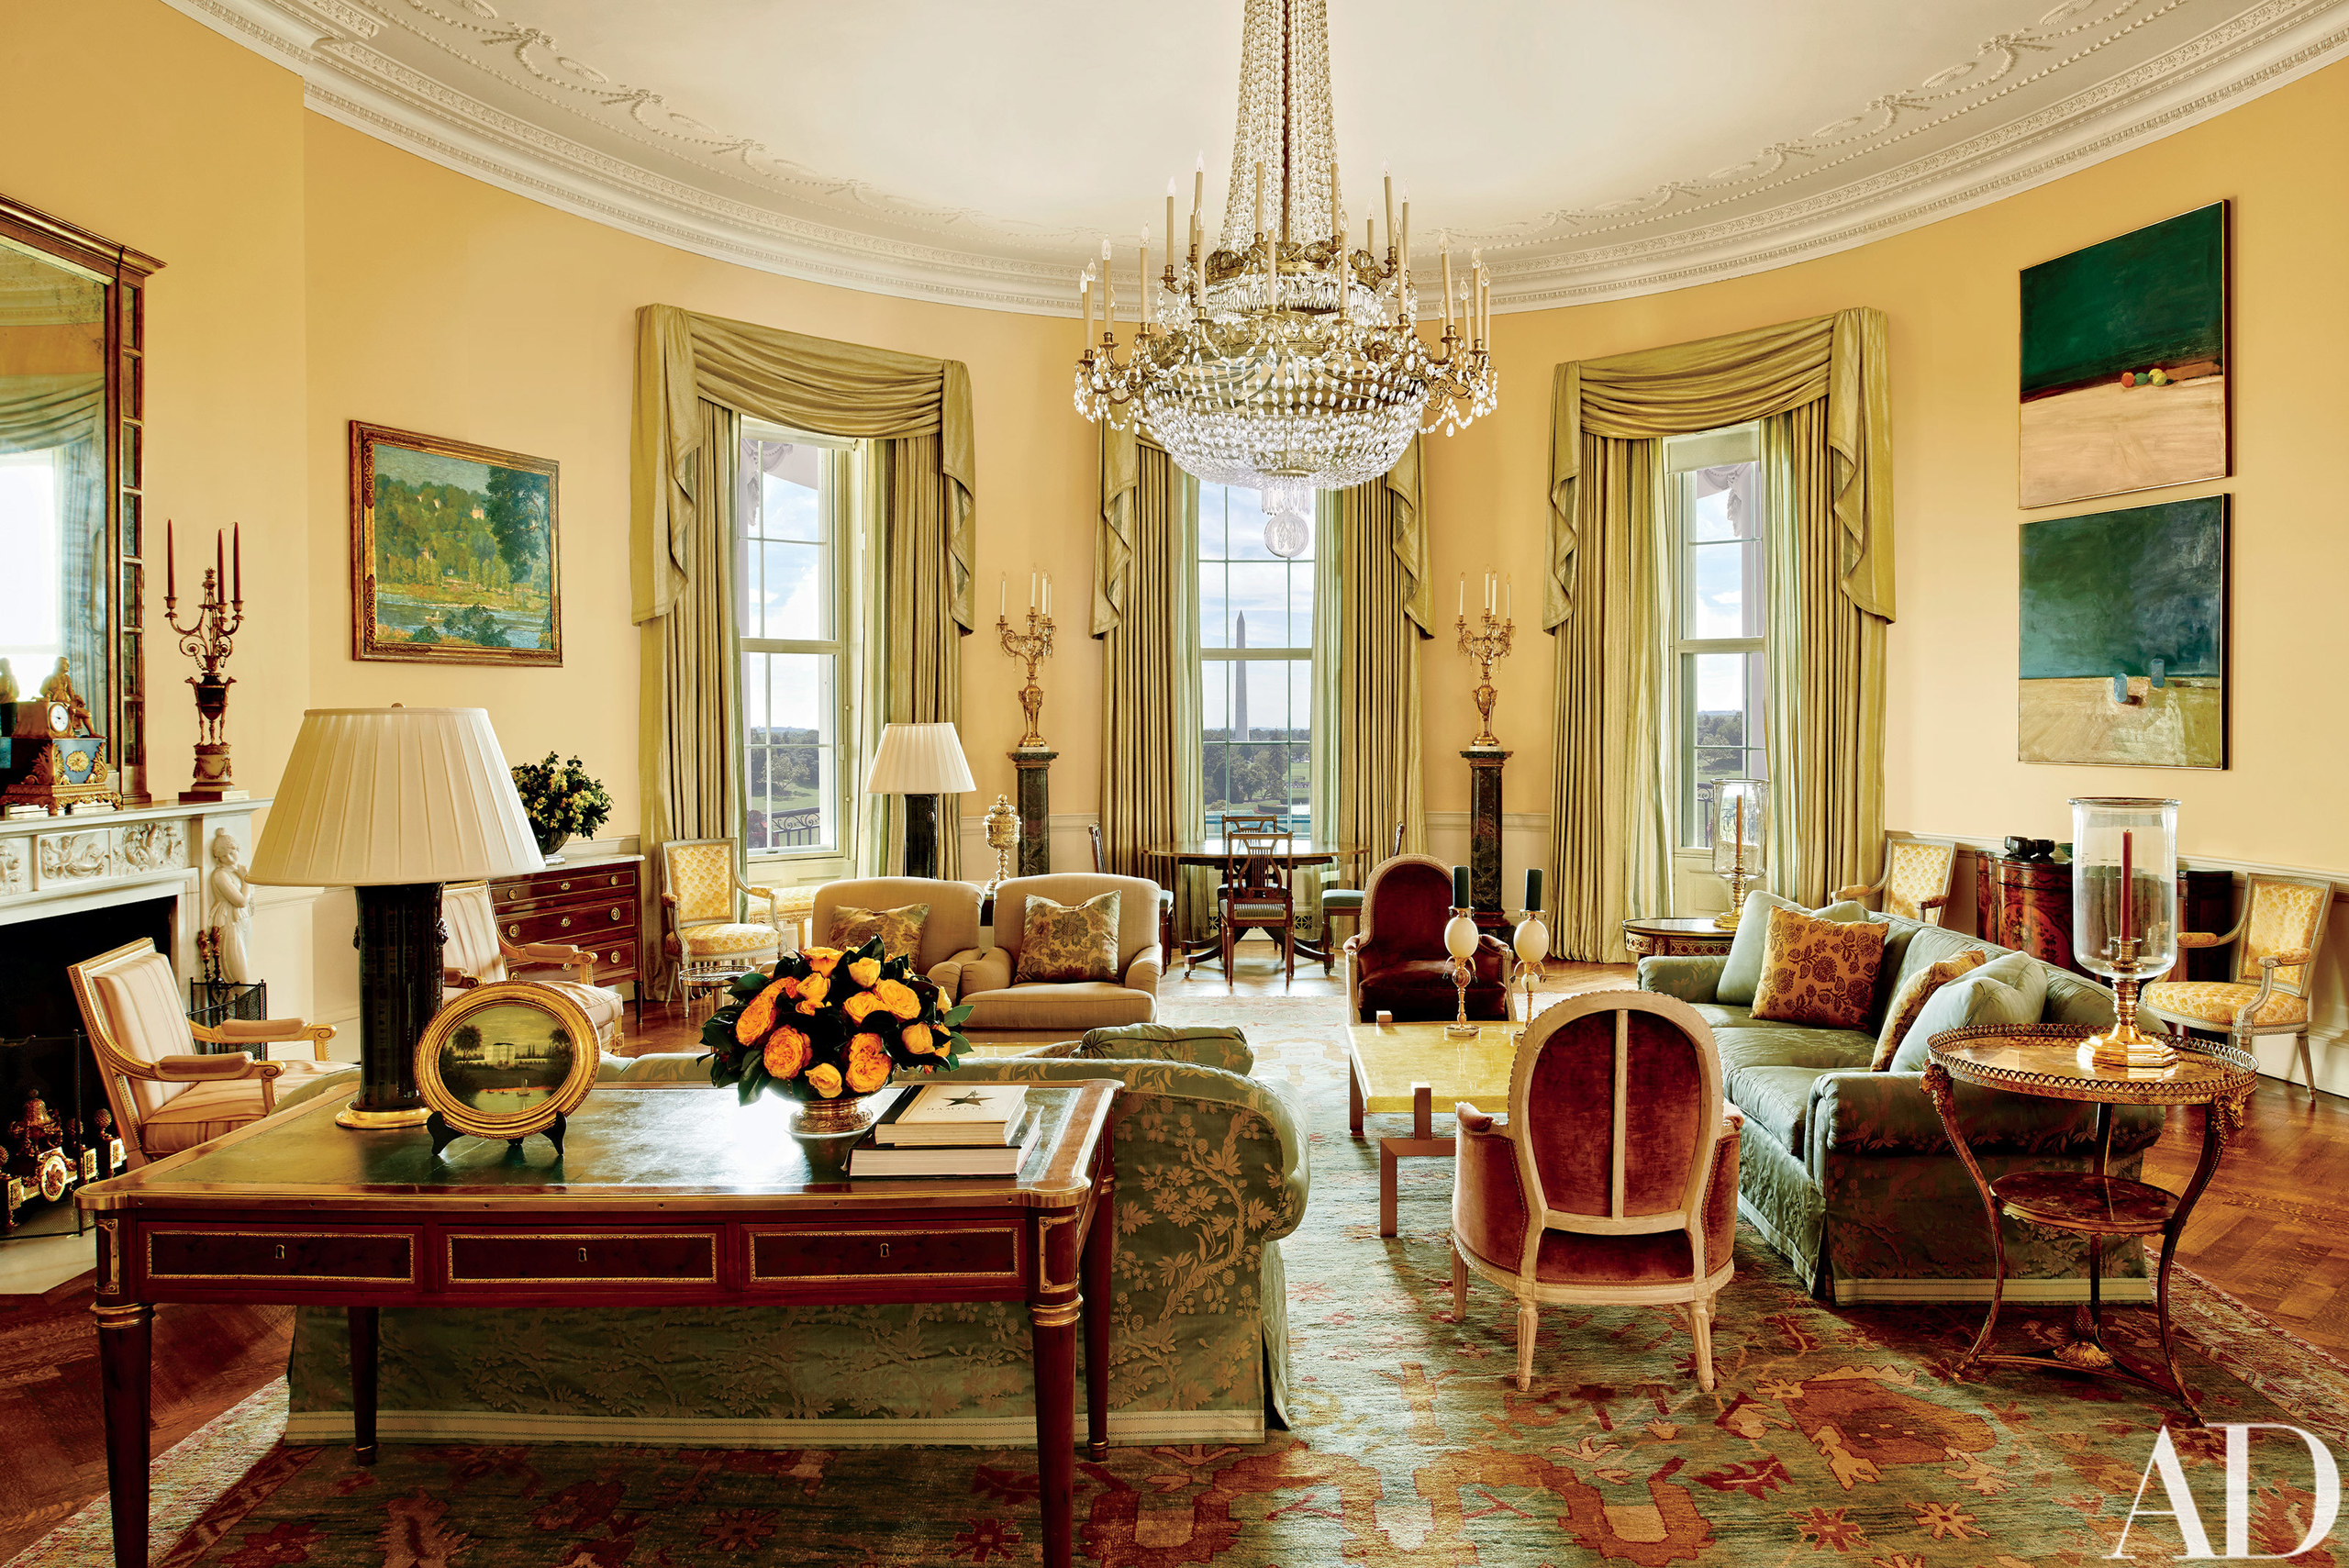 The Yellow Oval Room in the White House in Washington. Designer Michael S. Smith specified a Donald Kaufman paint for the Yellow Oval Room. Artworks by Paul Cézanne and Daniel Garber flank the mantel. Smith mellowed the Yellow Oval Room with smoky browns, greens, golds, and blues. The 1978 Camp David peace accords were signed at the antique Denis-Louis Ancellet desk, front left. (Michael Mundy—Architectural Digest/AP)